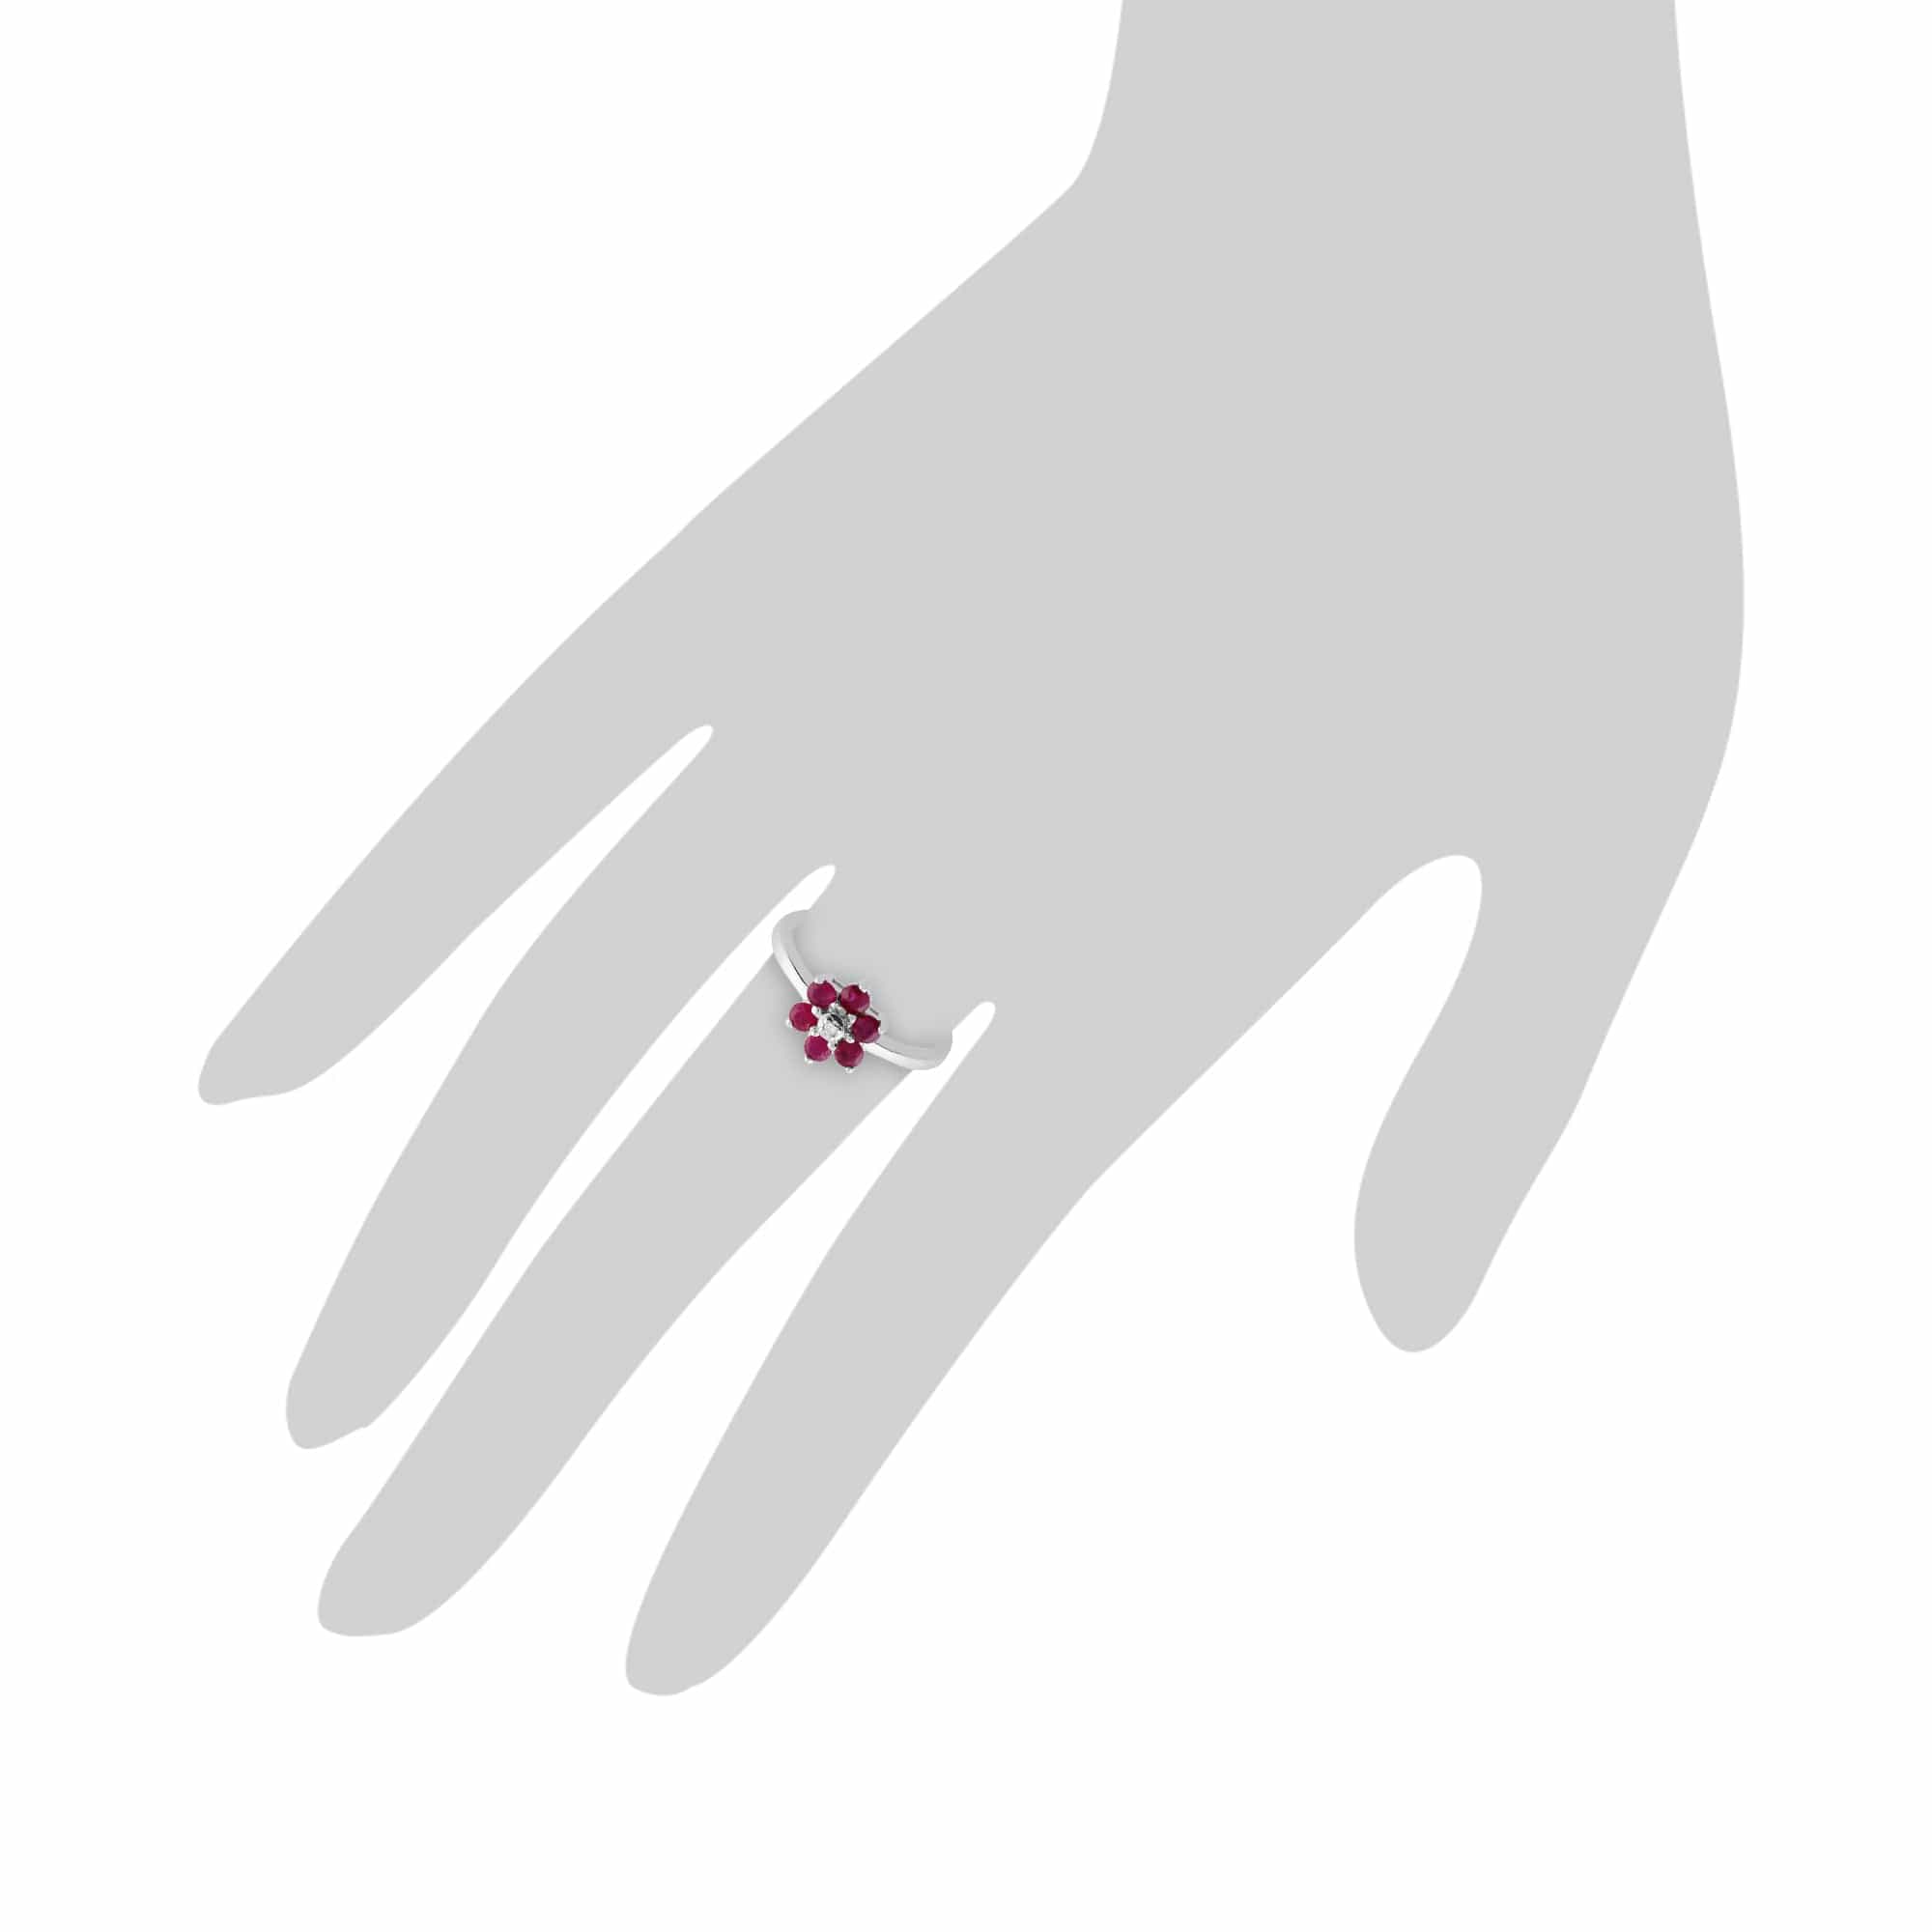 Floral Round Ruby & Diamond Cluster Ring in 9ct White Gold - Gemondo